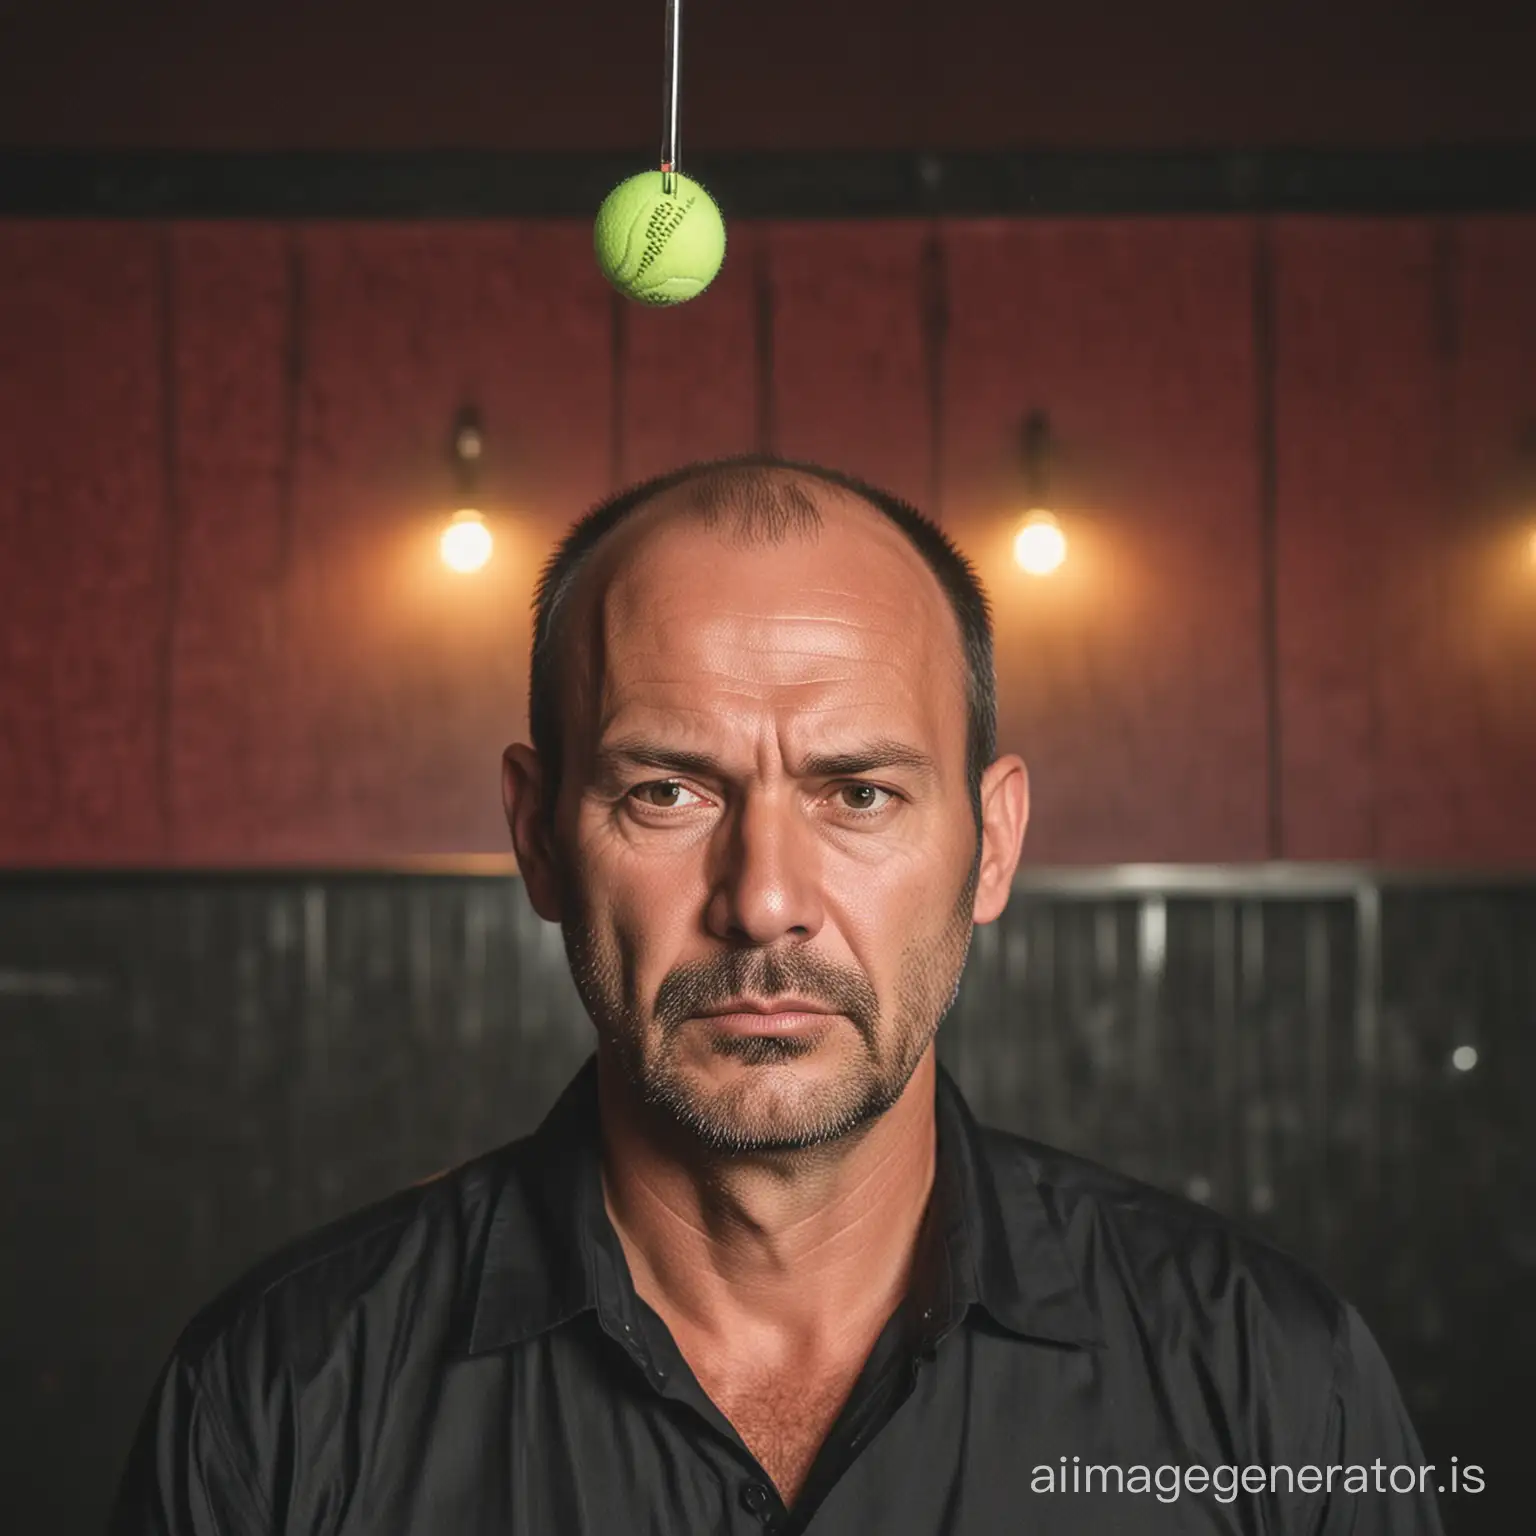 A short balding man in his 50s in a Bangkok sex club looking unhappy. Show the entire club and sex workers.  Have tennis balls flying past his head.  Important to show a woman lying on a stage behind him.